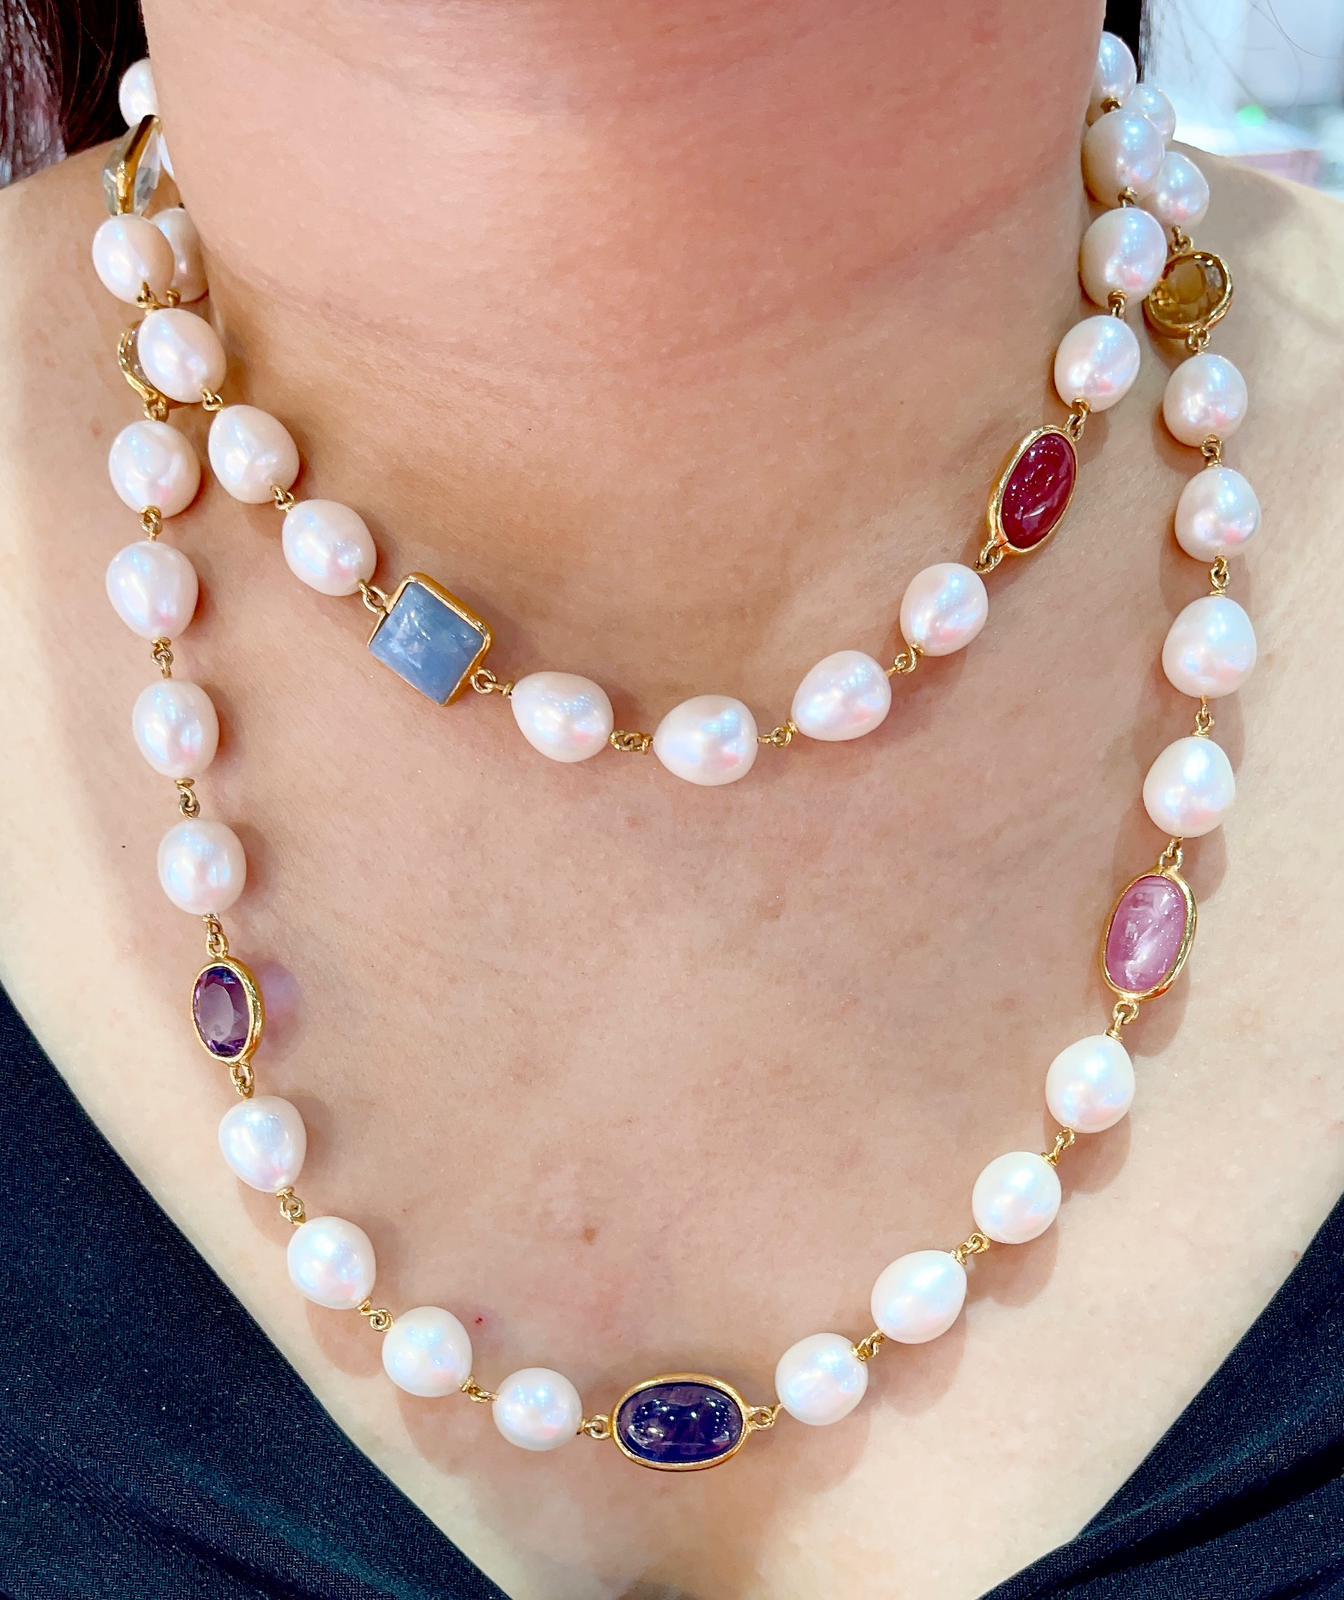 Bochic “Capri” Necklace, Gems & South Sea Pearls Set in 22 Gold & Silver For Sale